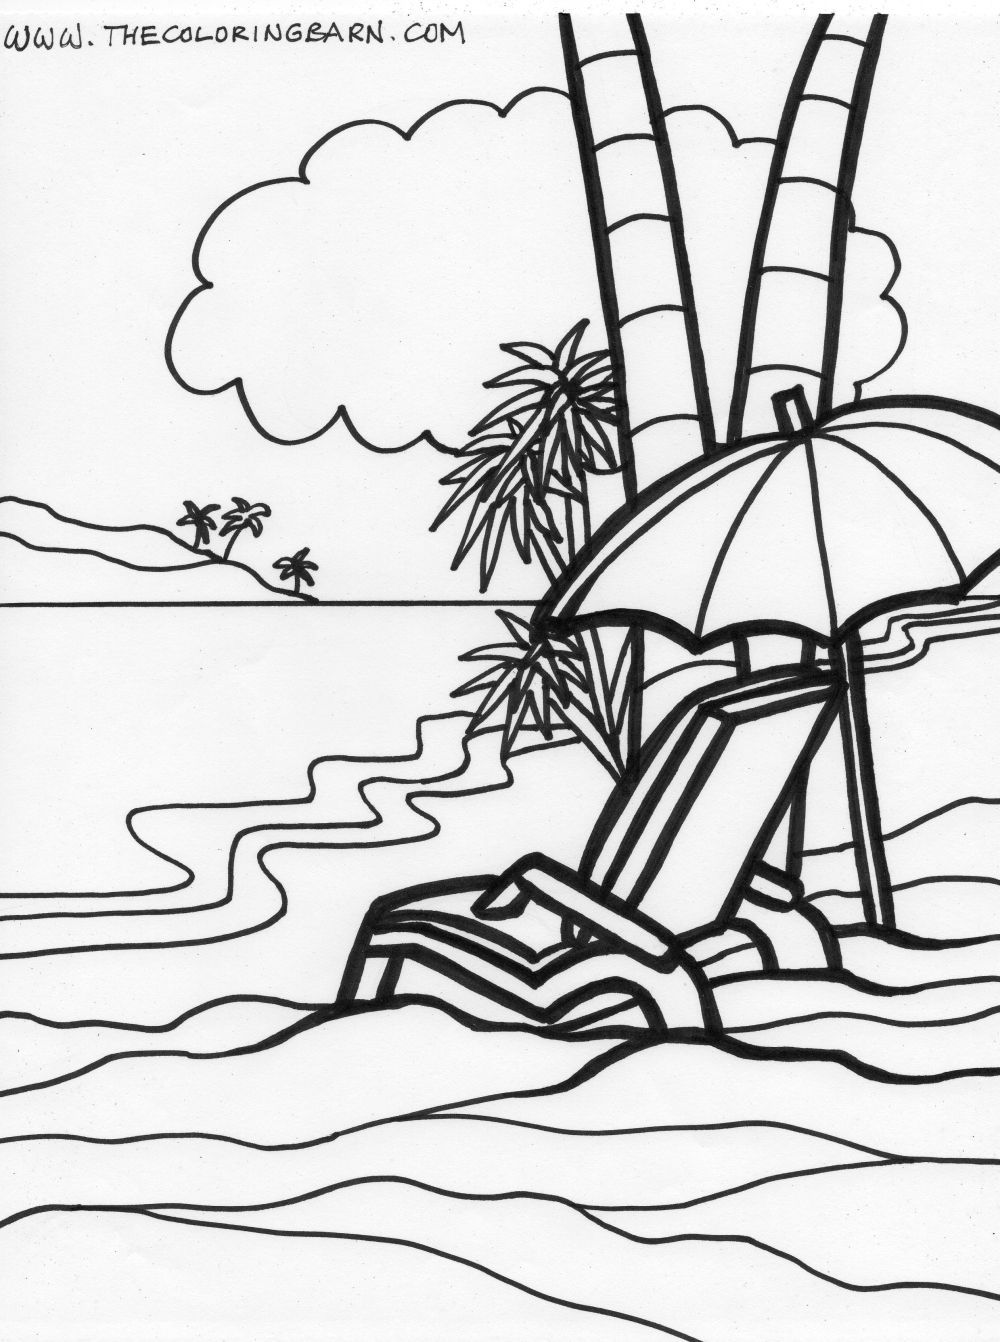 Island coloring pages free the coloring barn beach coloring pages coloring pages ocean coloring pages